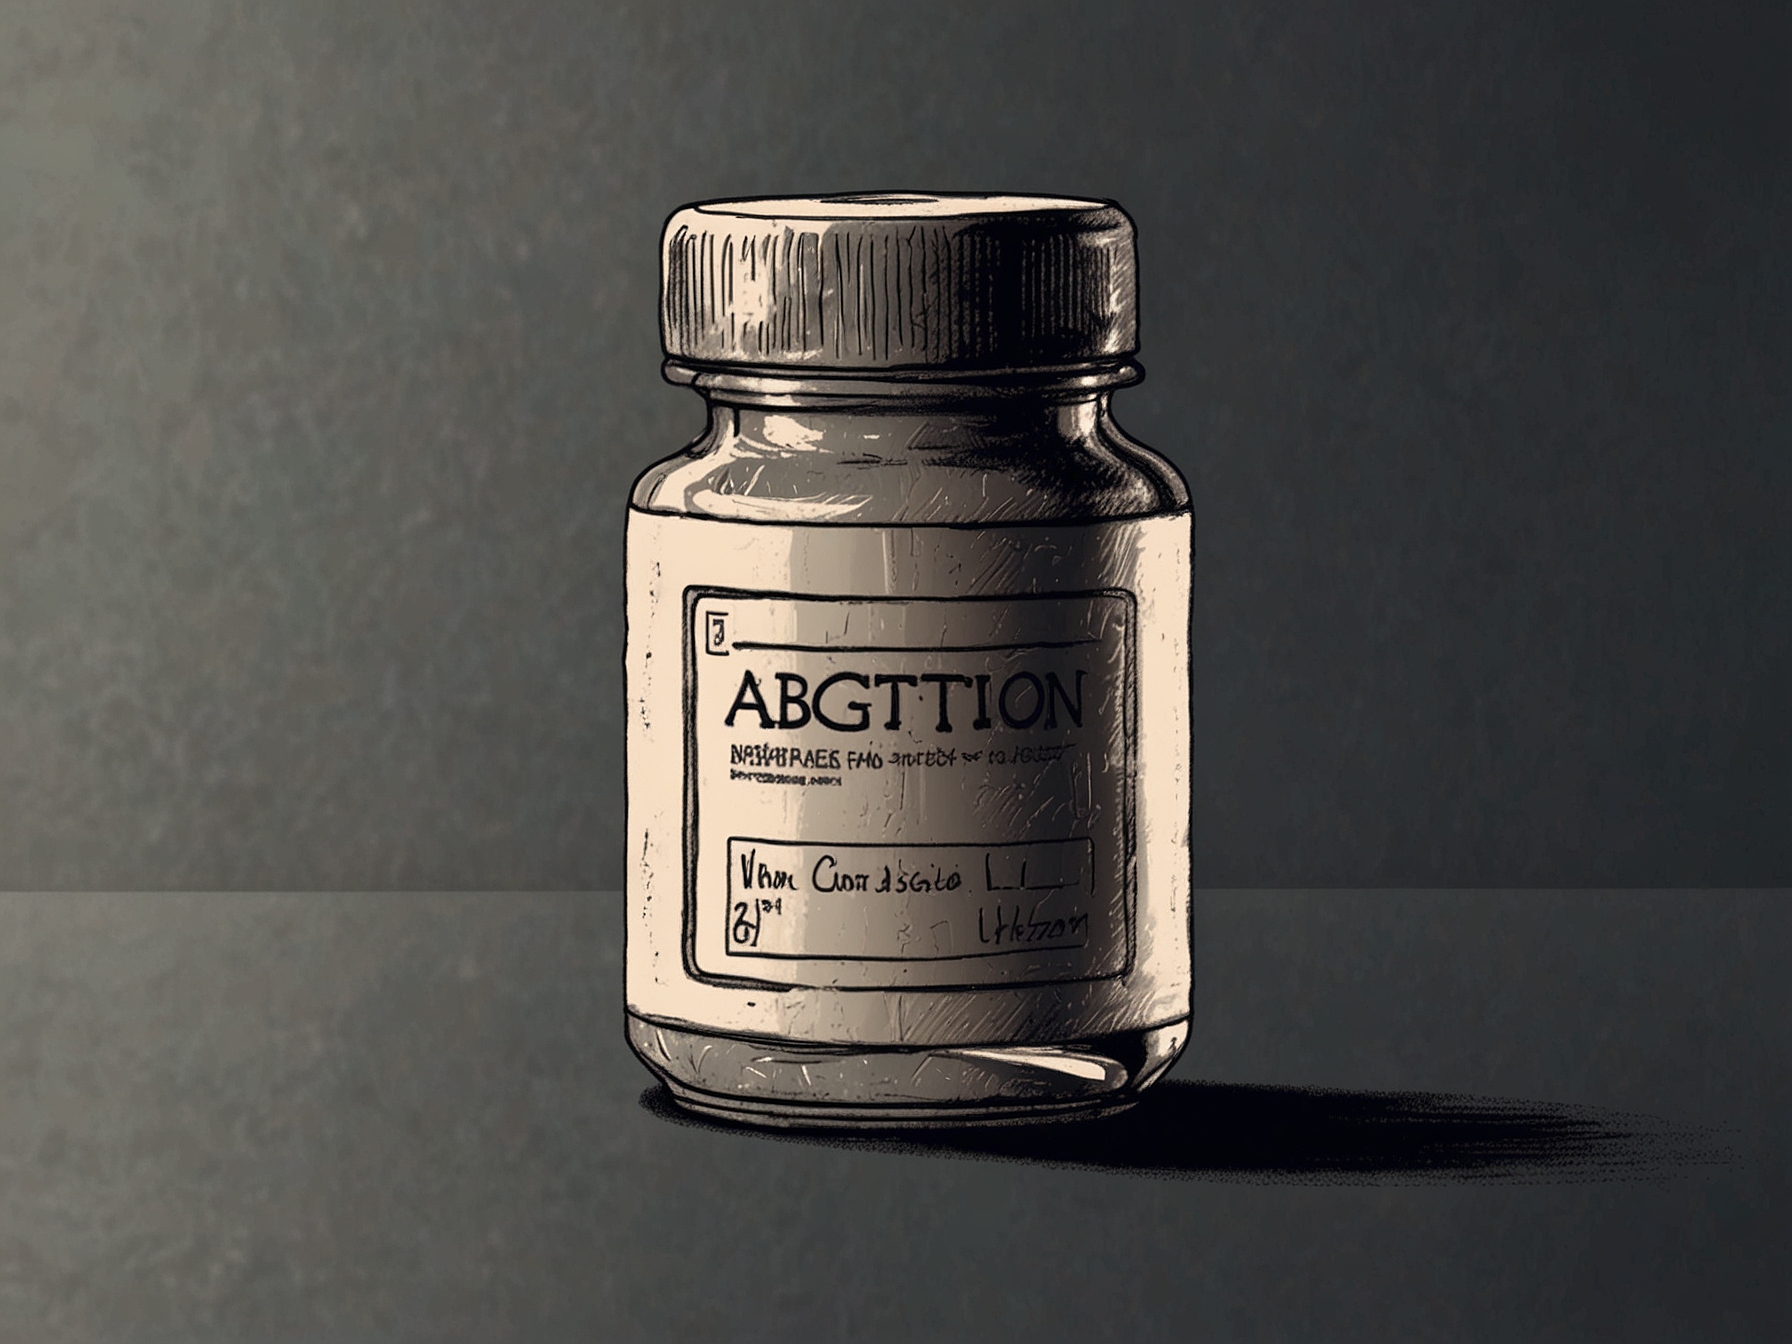 Close-up of an abortion pill bottle, symbolizing the ongoing judicial debates regarding its accessibility and legality.